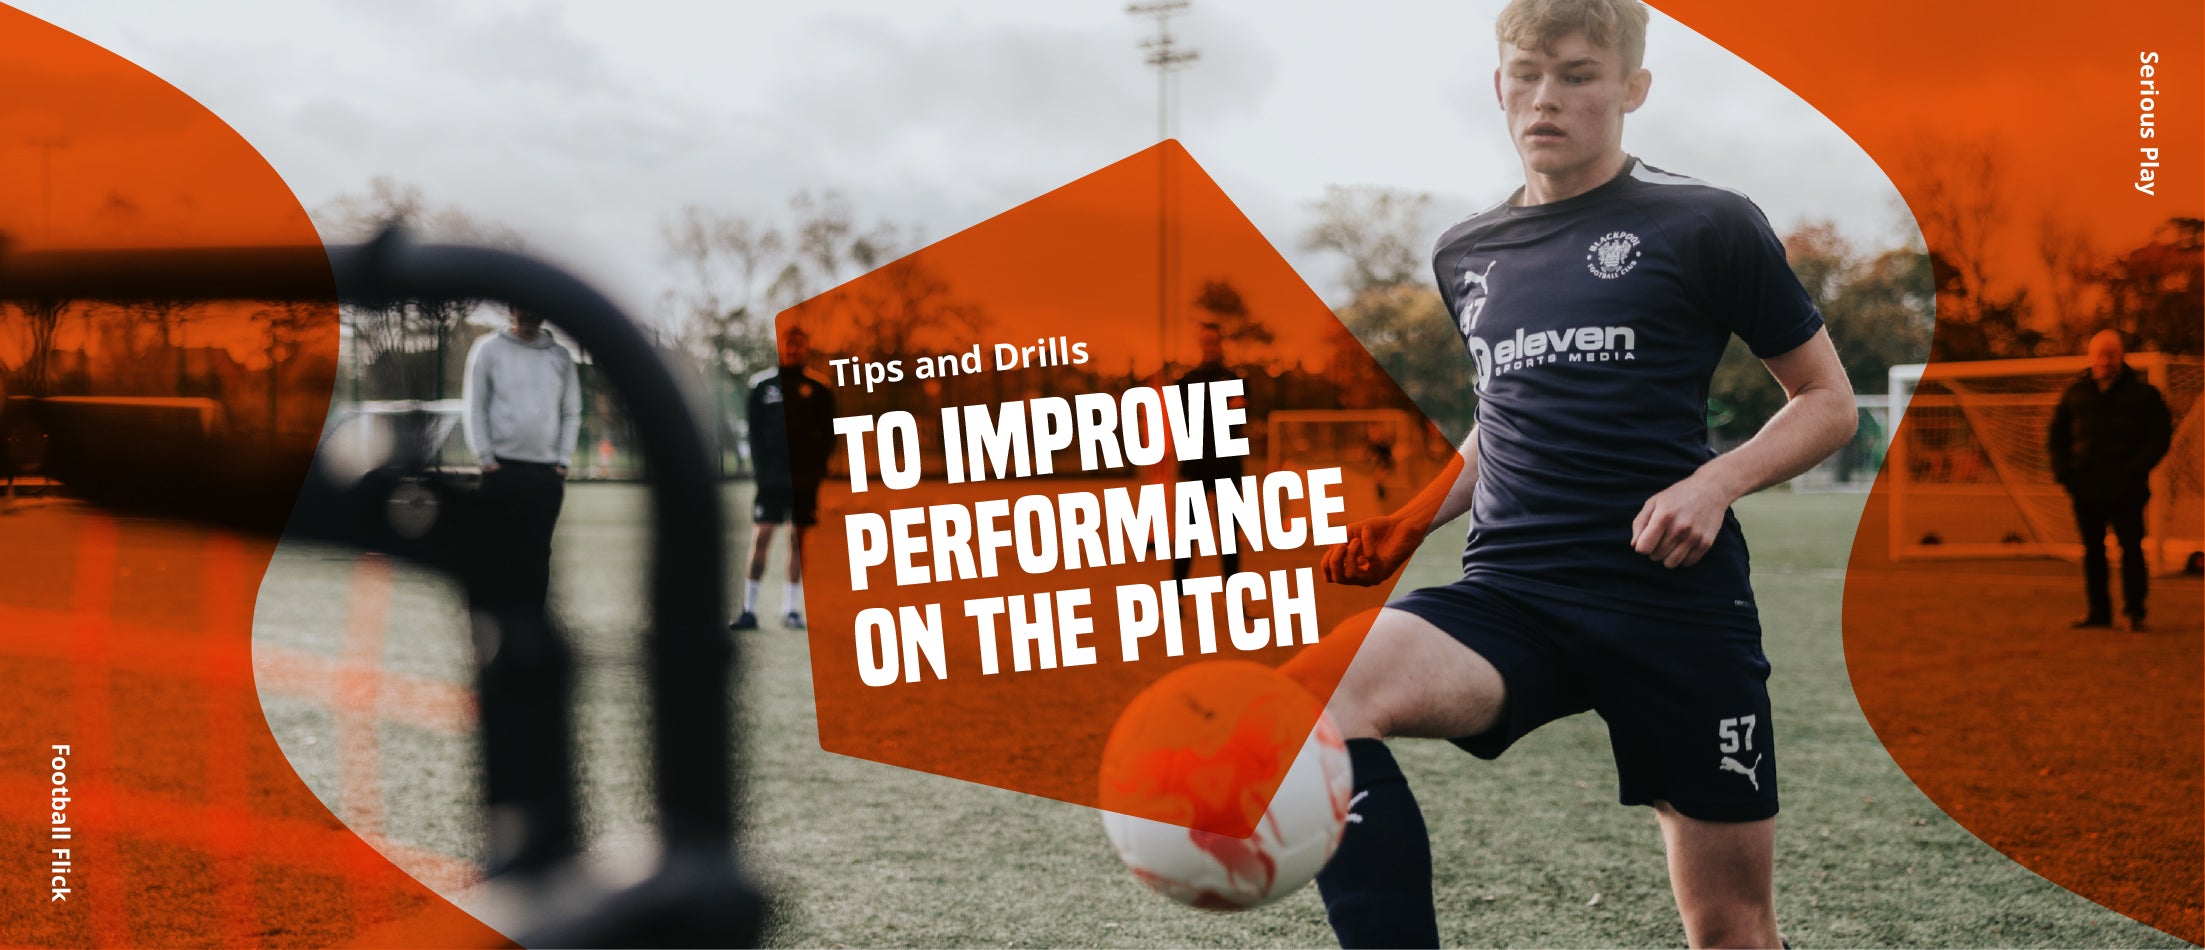 6 Training tips & drills to improve performance on the pitch